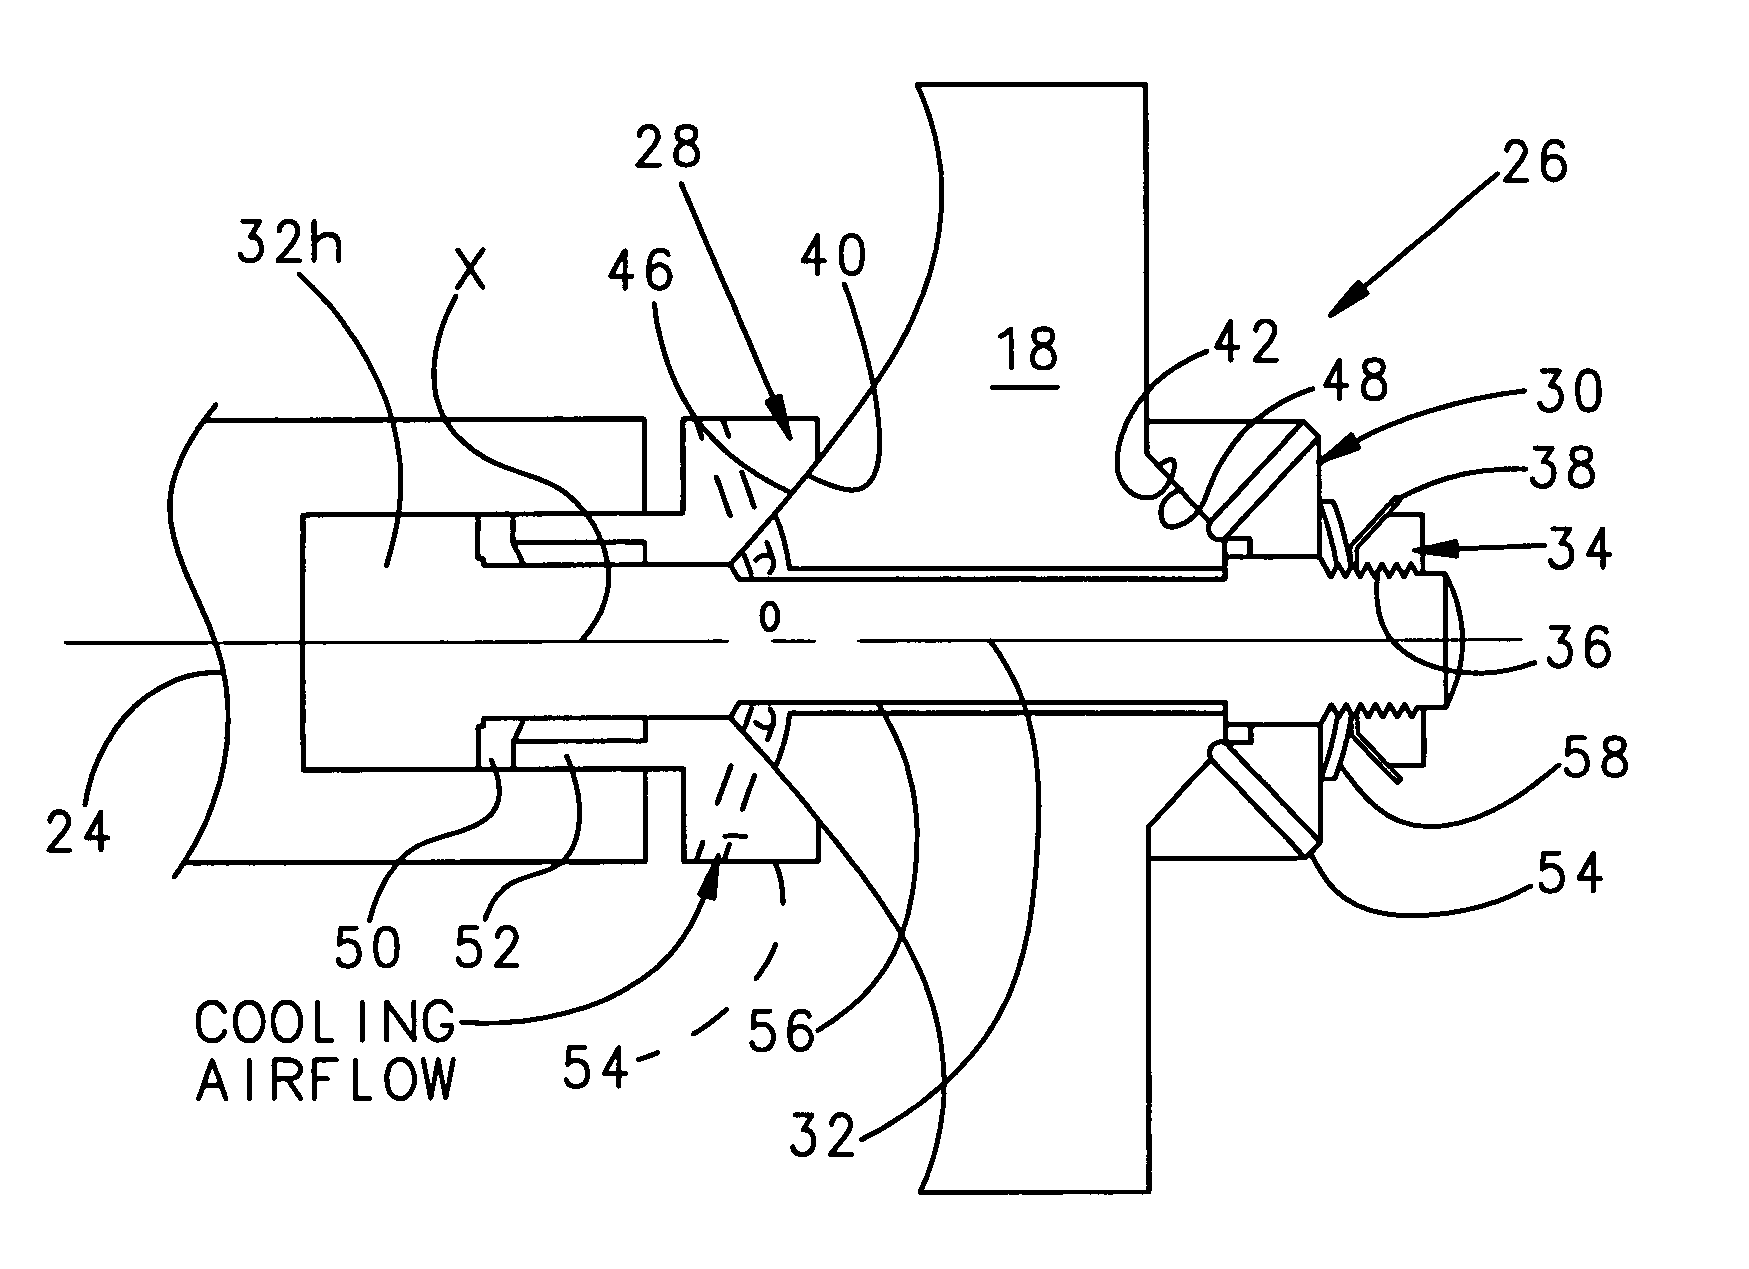 Mechanical coupling for a rotor shaft assembly of dissimilar materials